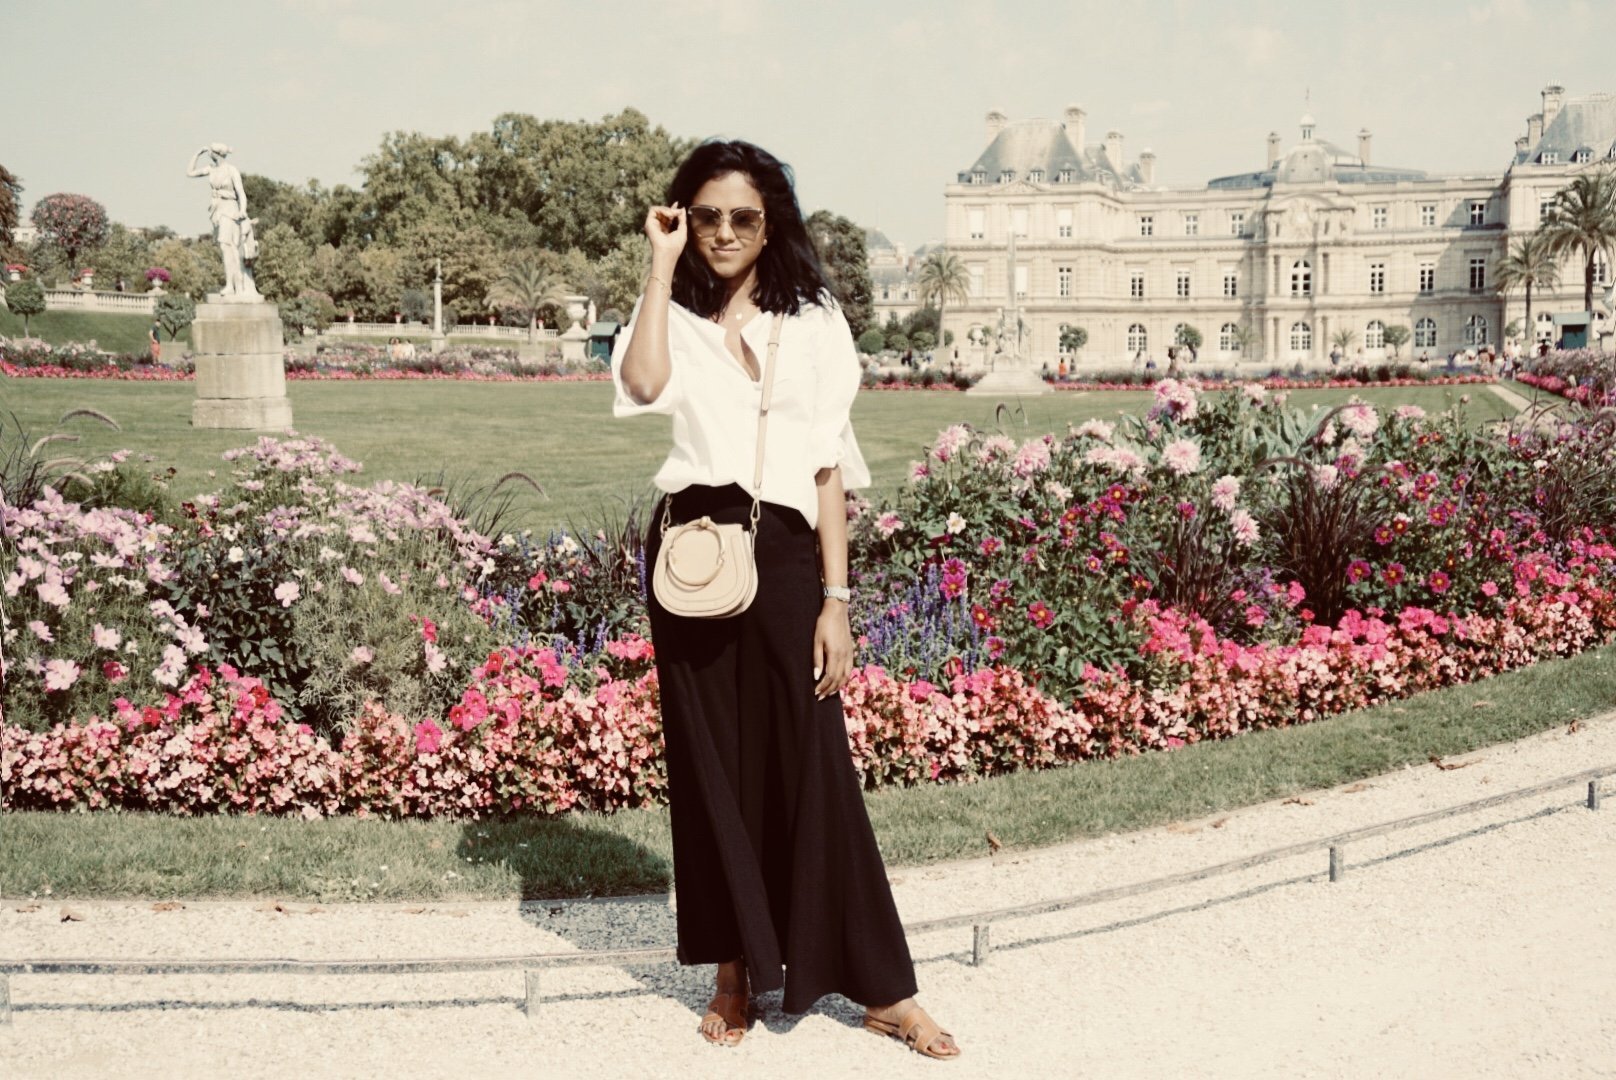 Sachini wearing a white shirt, black trousers, Chanel sunglasses and a Chloé bag in the Jardin du Luxembourg